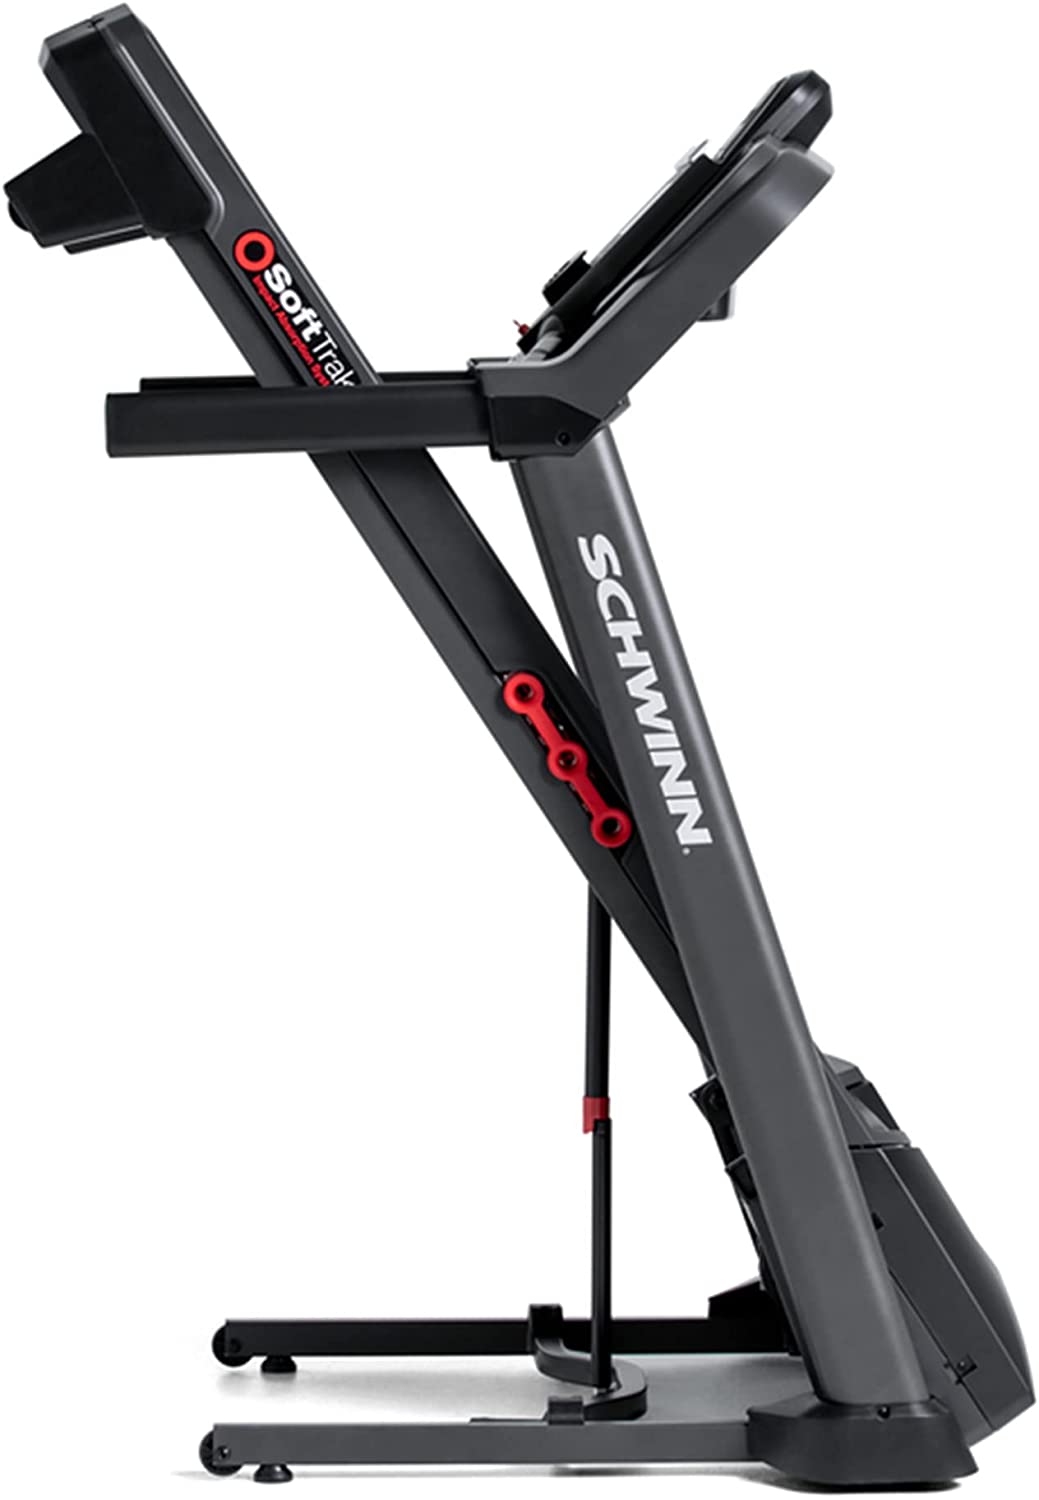 Schwinn Fitness 810 Treadmill — folds up for small-spaced homes